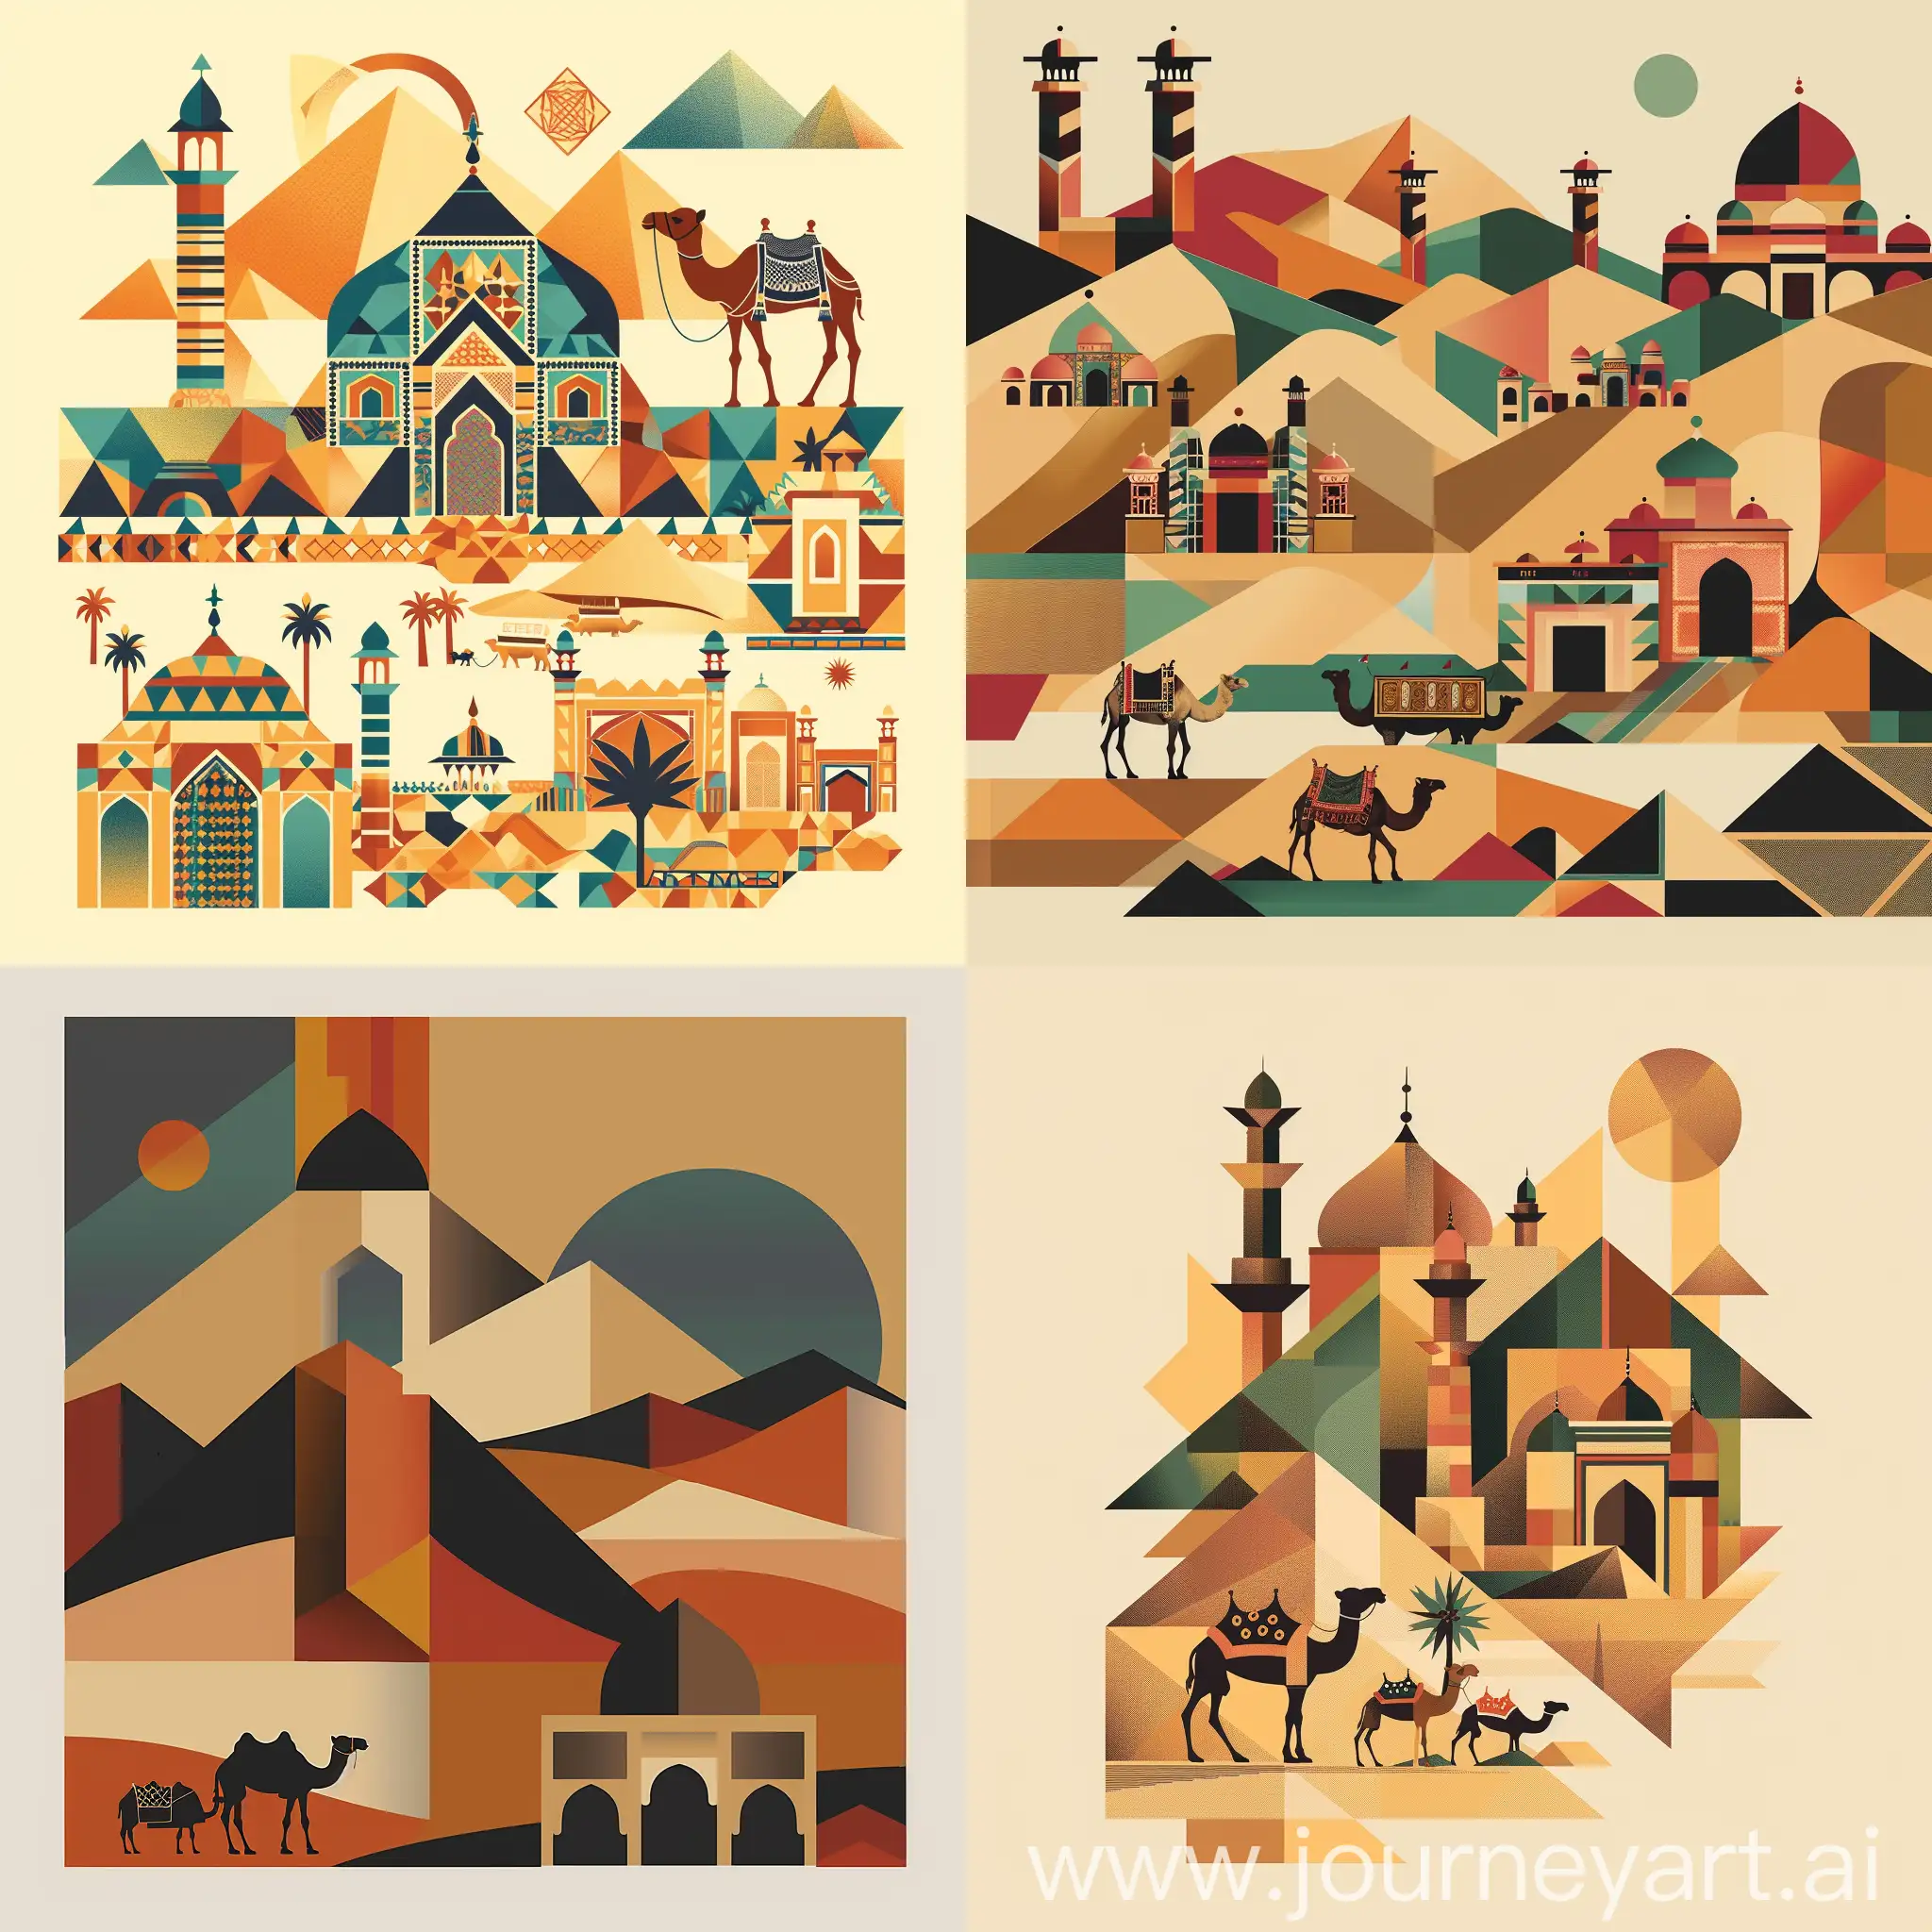 "Generate geometric shapes inspired by the desert landscape of Pakistan, emphasizing sophistication and cultural resonance. Consider incorporating elements such as sand dunes, camel caravans, oasis motifs, or traditional architectural patterns found in desert regions. Aim for a design that captures the essence of the desert while maintaining a refined aesthetic suitable for a banknote."